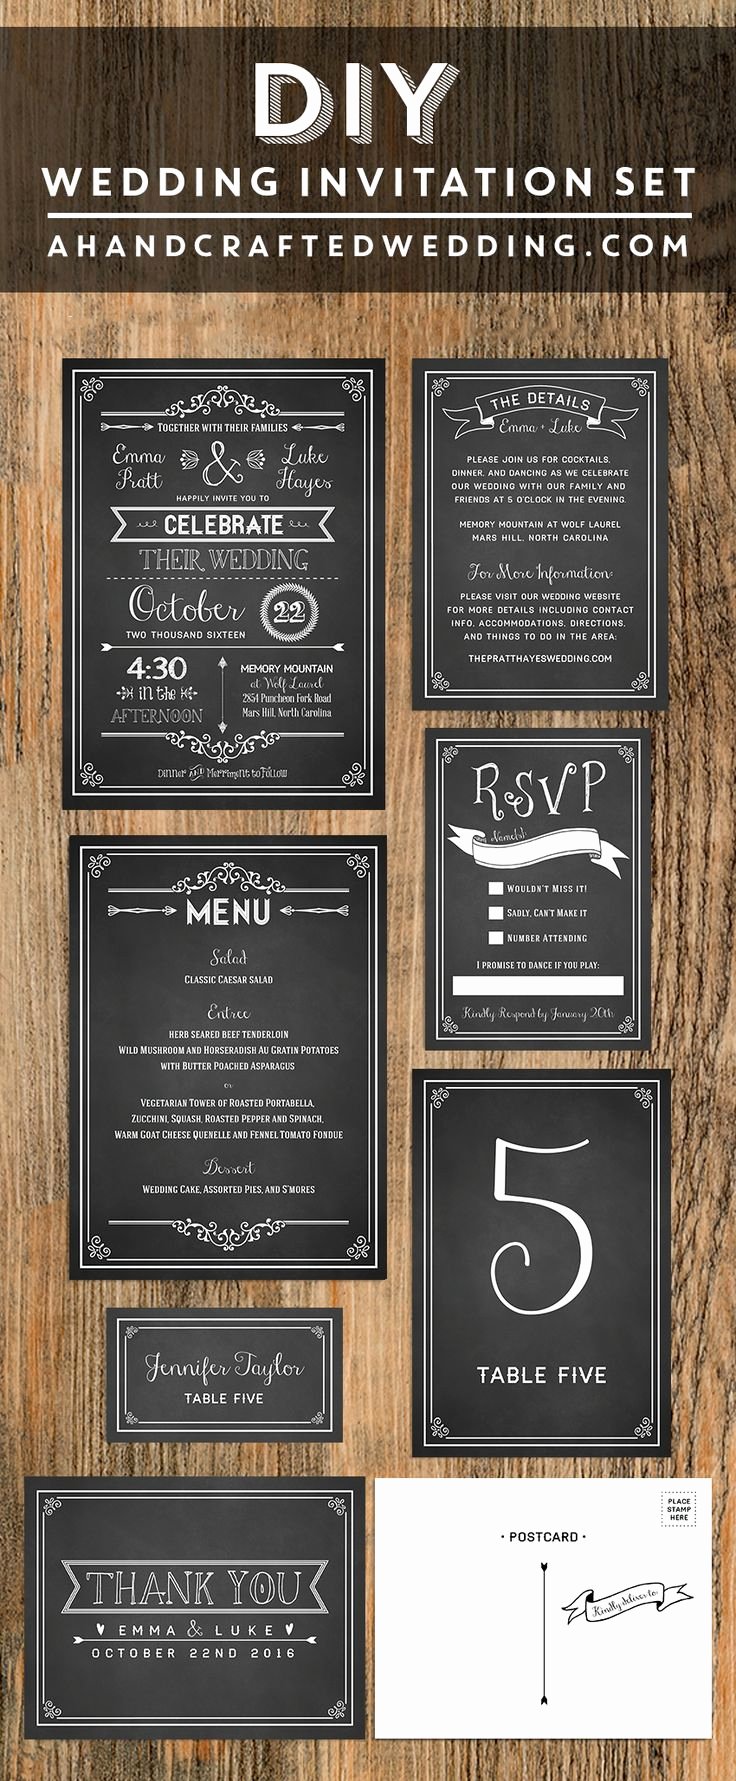 Chalkboard Invitation Template Free Lovely 584 Best Images About Free Printables Parties Invitation On Pinterest